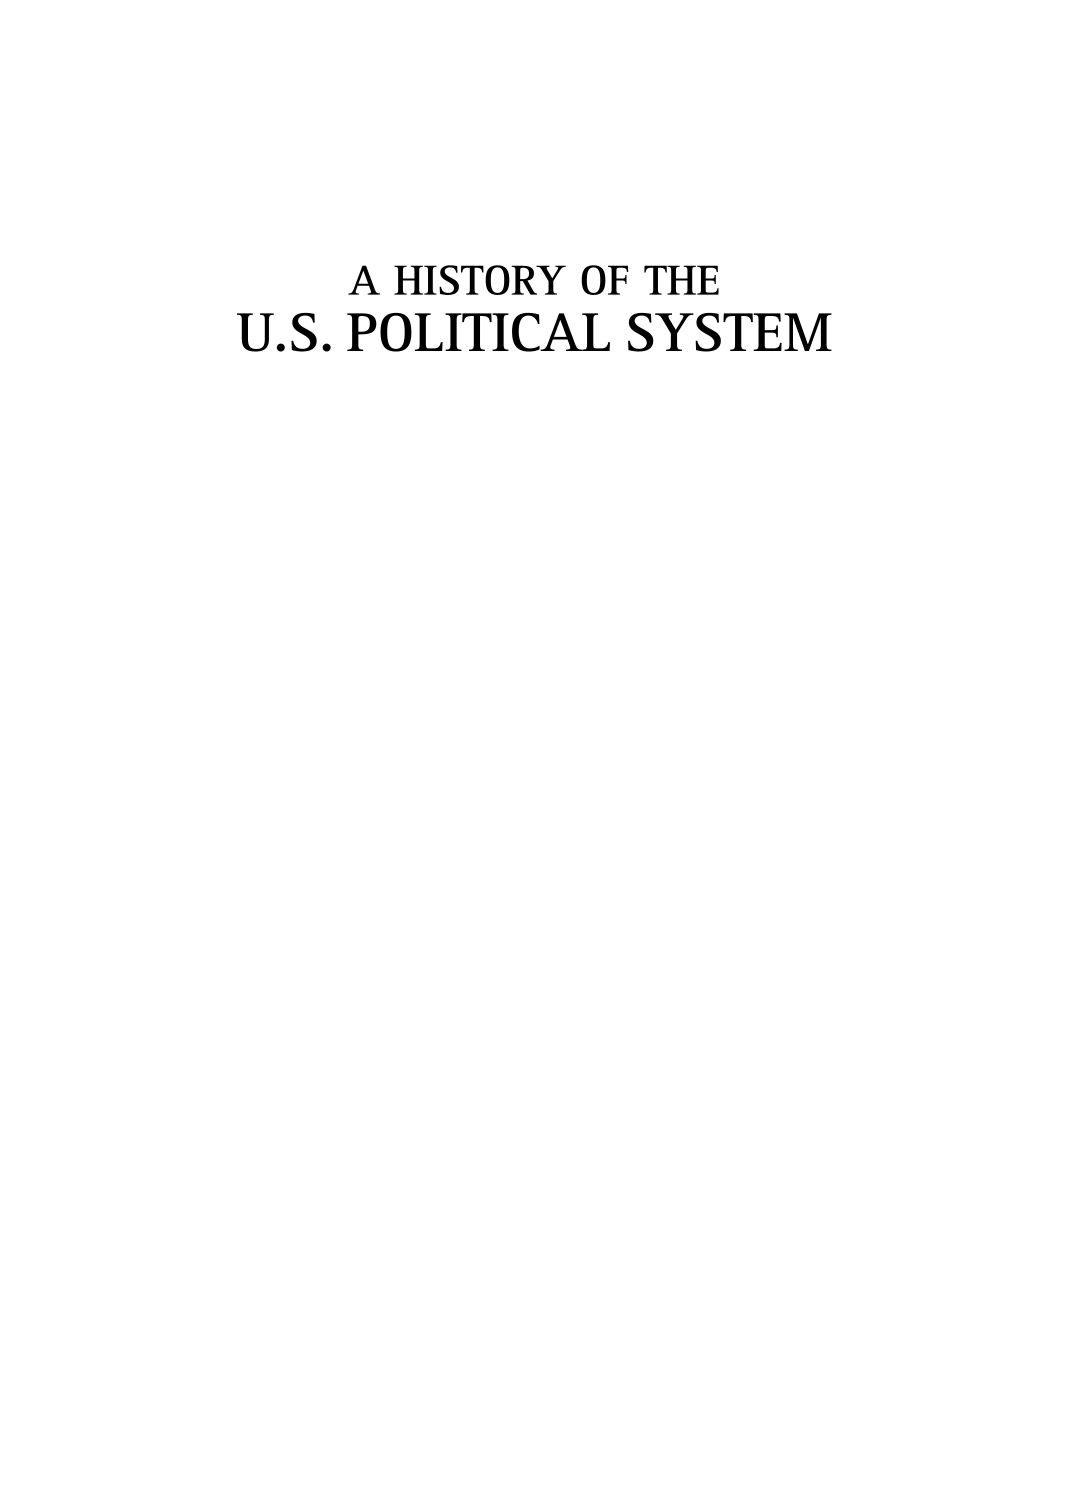 A History of the U.S. Political System: Ideas, Interests, and Institutions [3 volumes] page Vol1-i